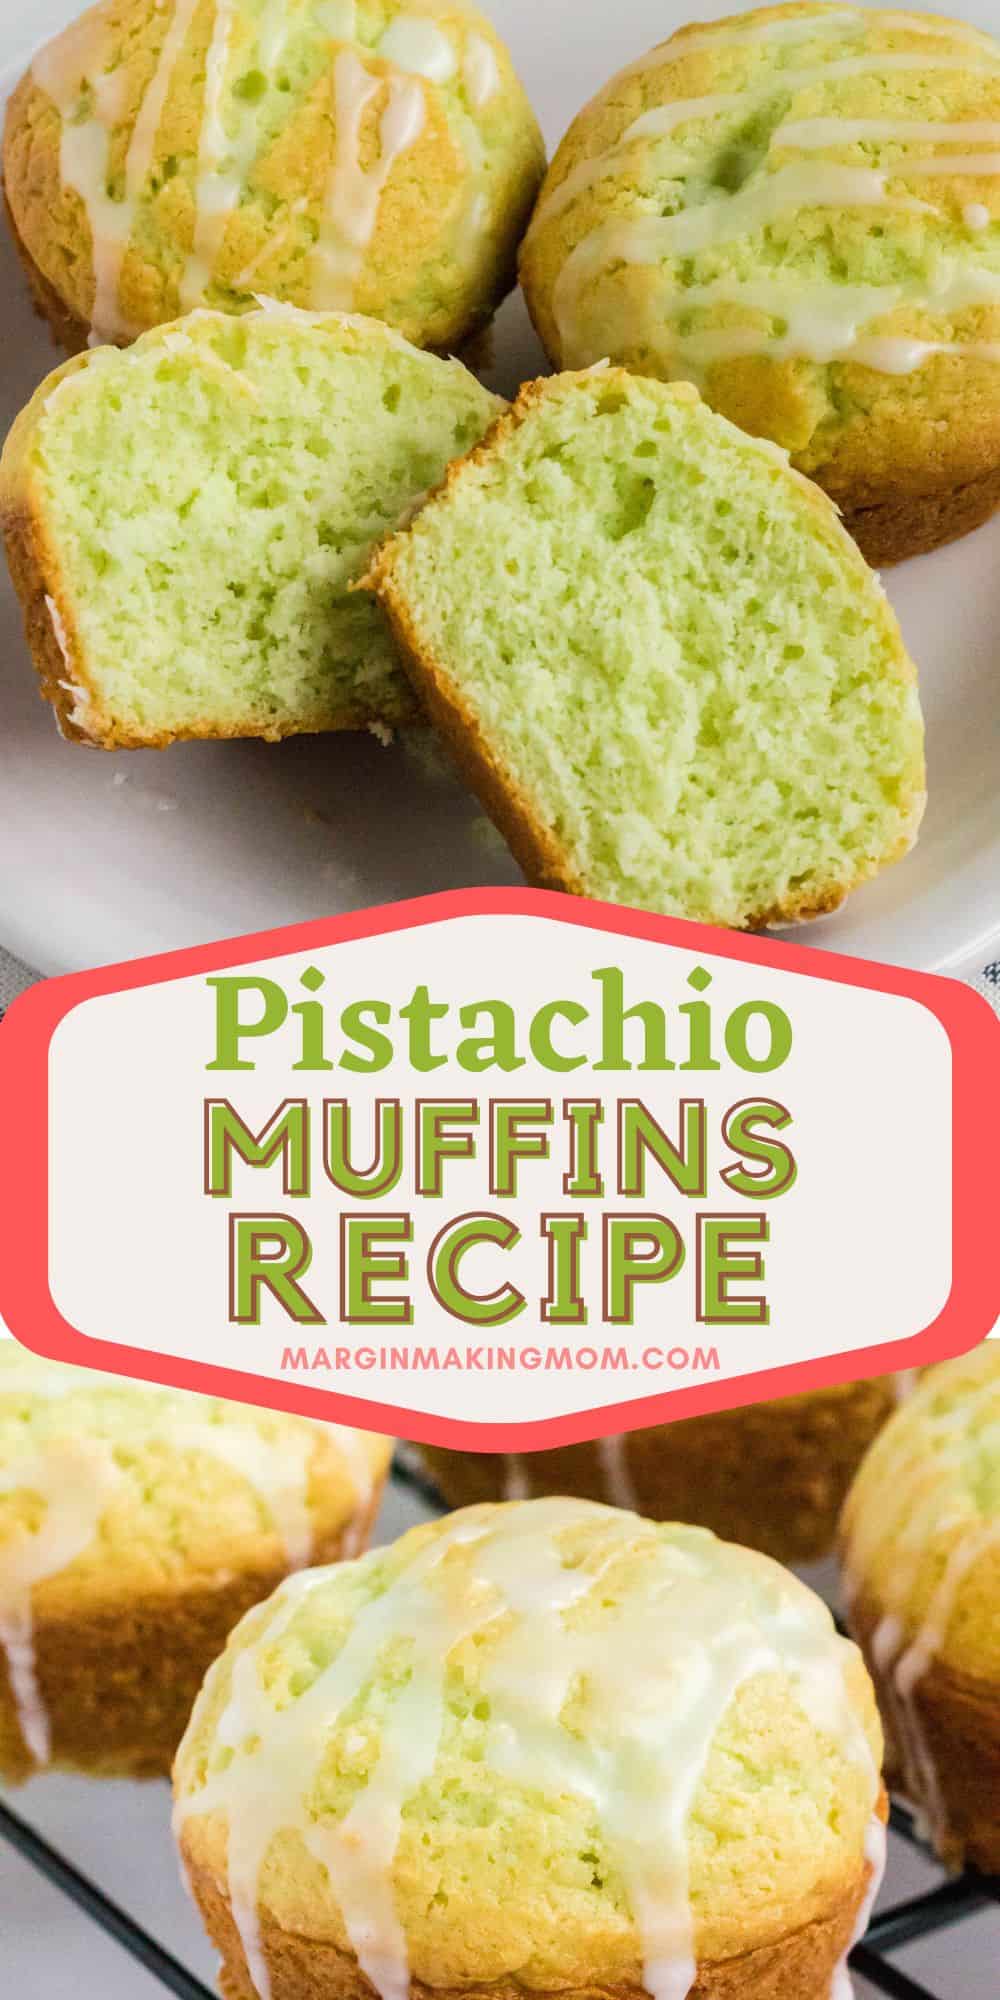 two photos; one shows the interior of a pistachio muffin that's been cut in half, the other shows the top of a pistachio muffin drizzled with glaze.